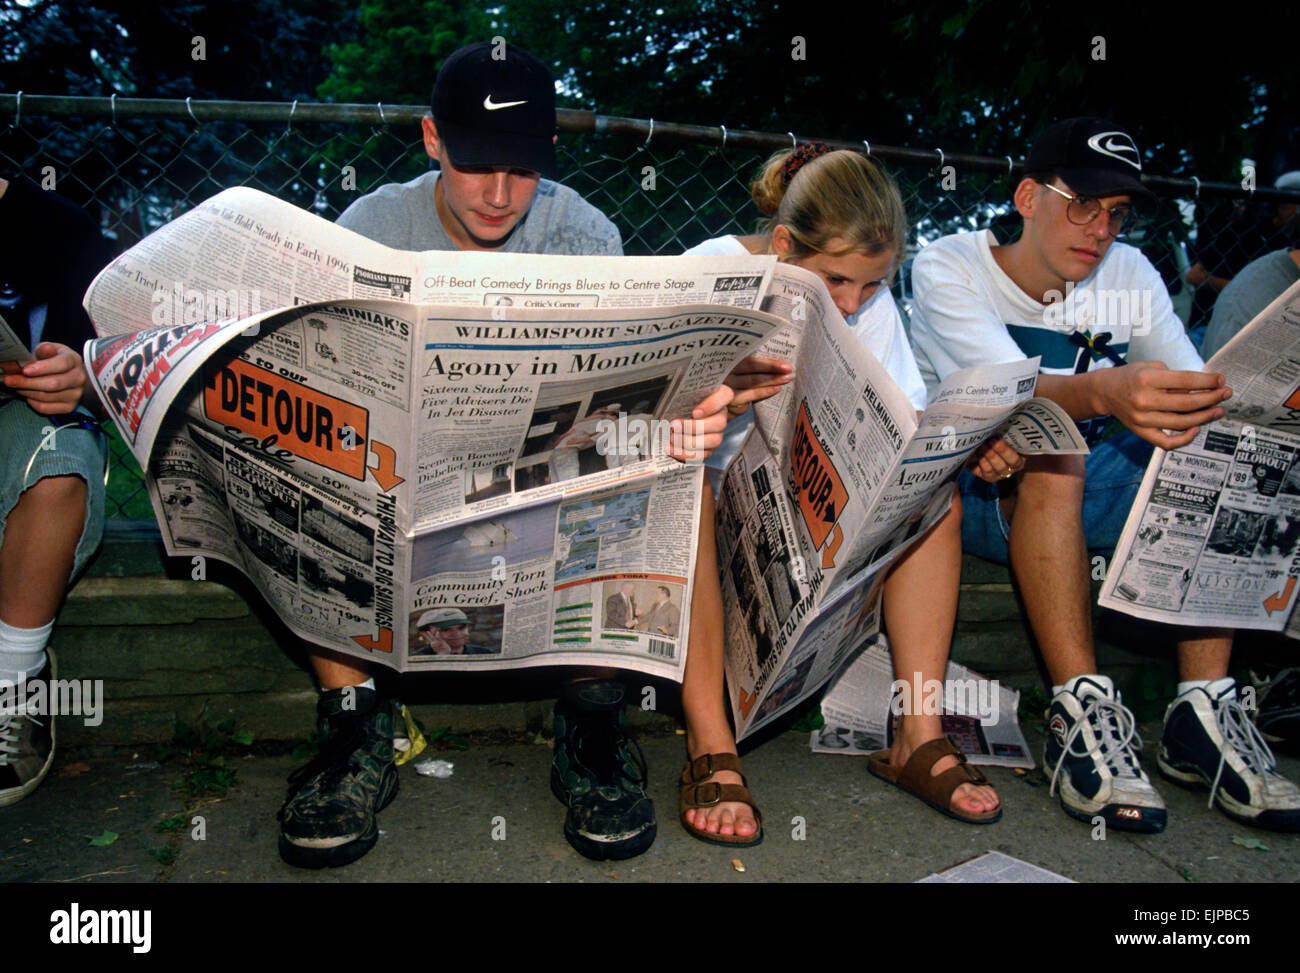 Students mourn their friends killed aboard TWA Airlines Flight 800 as they read news reports of the tragedy July 18, 1996 in Montoursville, PA. TWA Flight 800 exploded off East Moriches, NY with the loss of 230 lives including 21 students from the town. Stock Photo